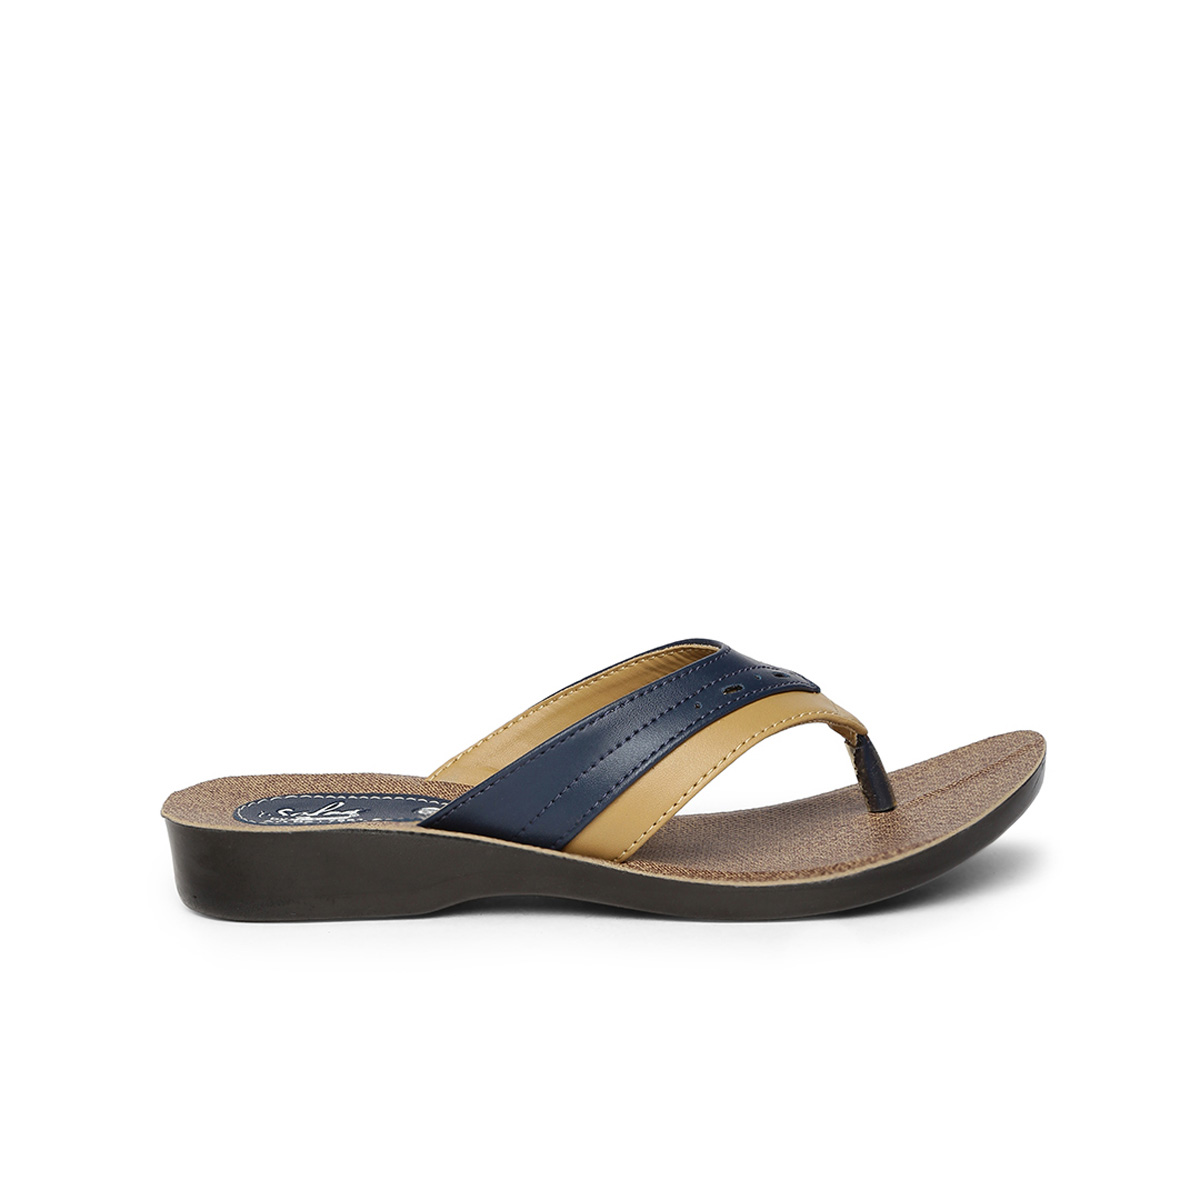 Buy Paragon-Solea Women's Blue Slippers Online @ ₹269 from ShopClues